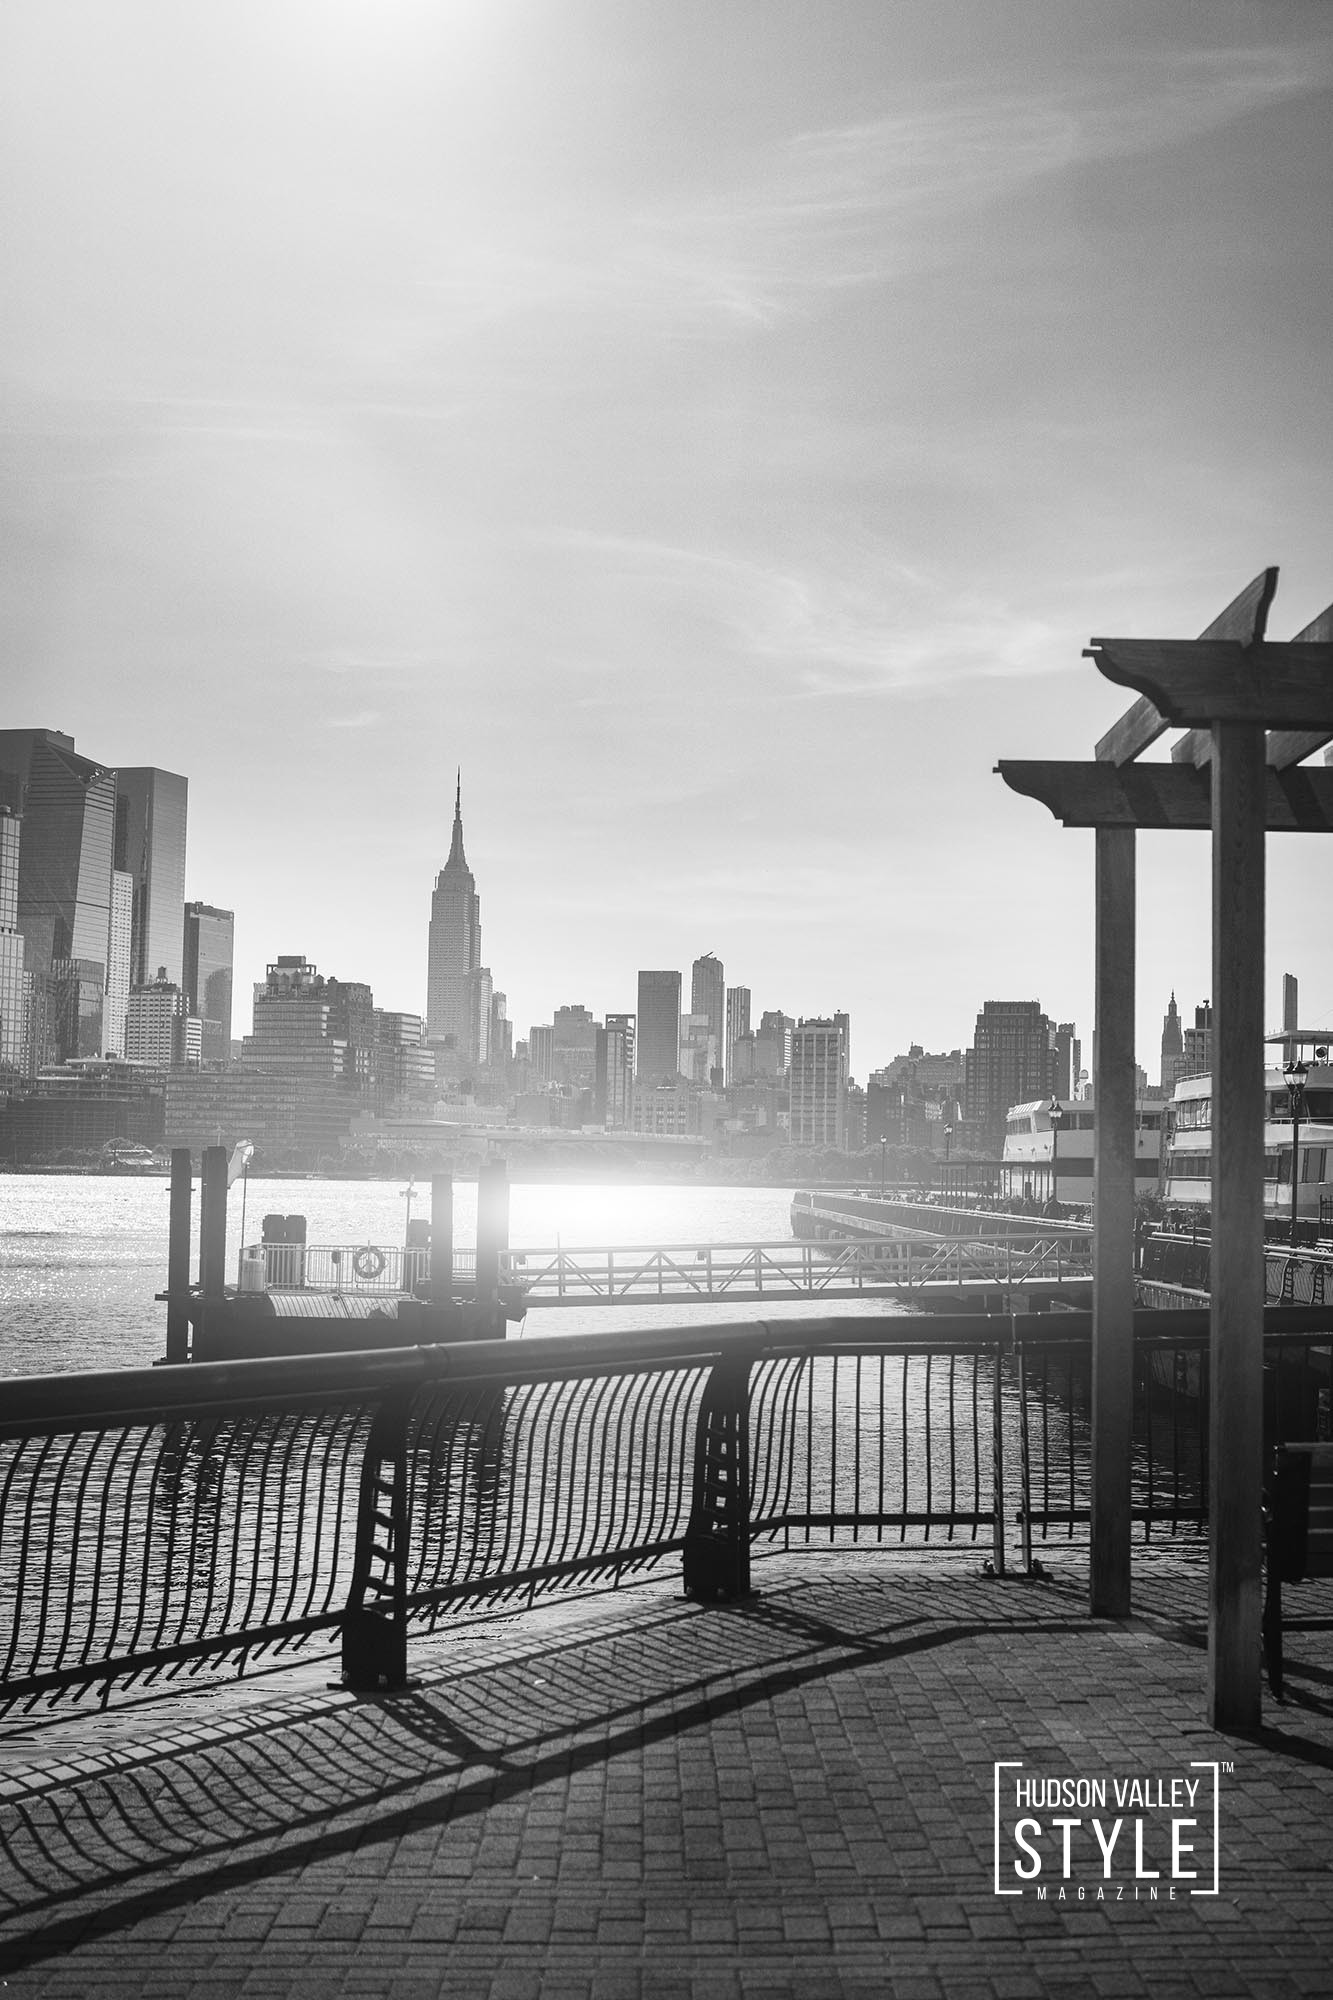 Savoring the Hudson River View: A Manhattan Skyline Breakfast Adventure at the Turning Point of Hoboken – Restaurant Reviews with Photographer Maxwell Alexander – Presented by Alluvion Vacations